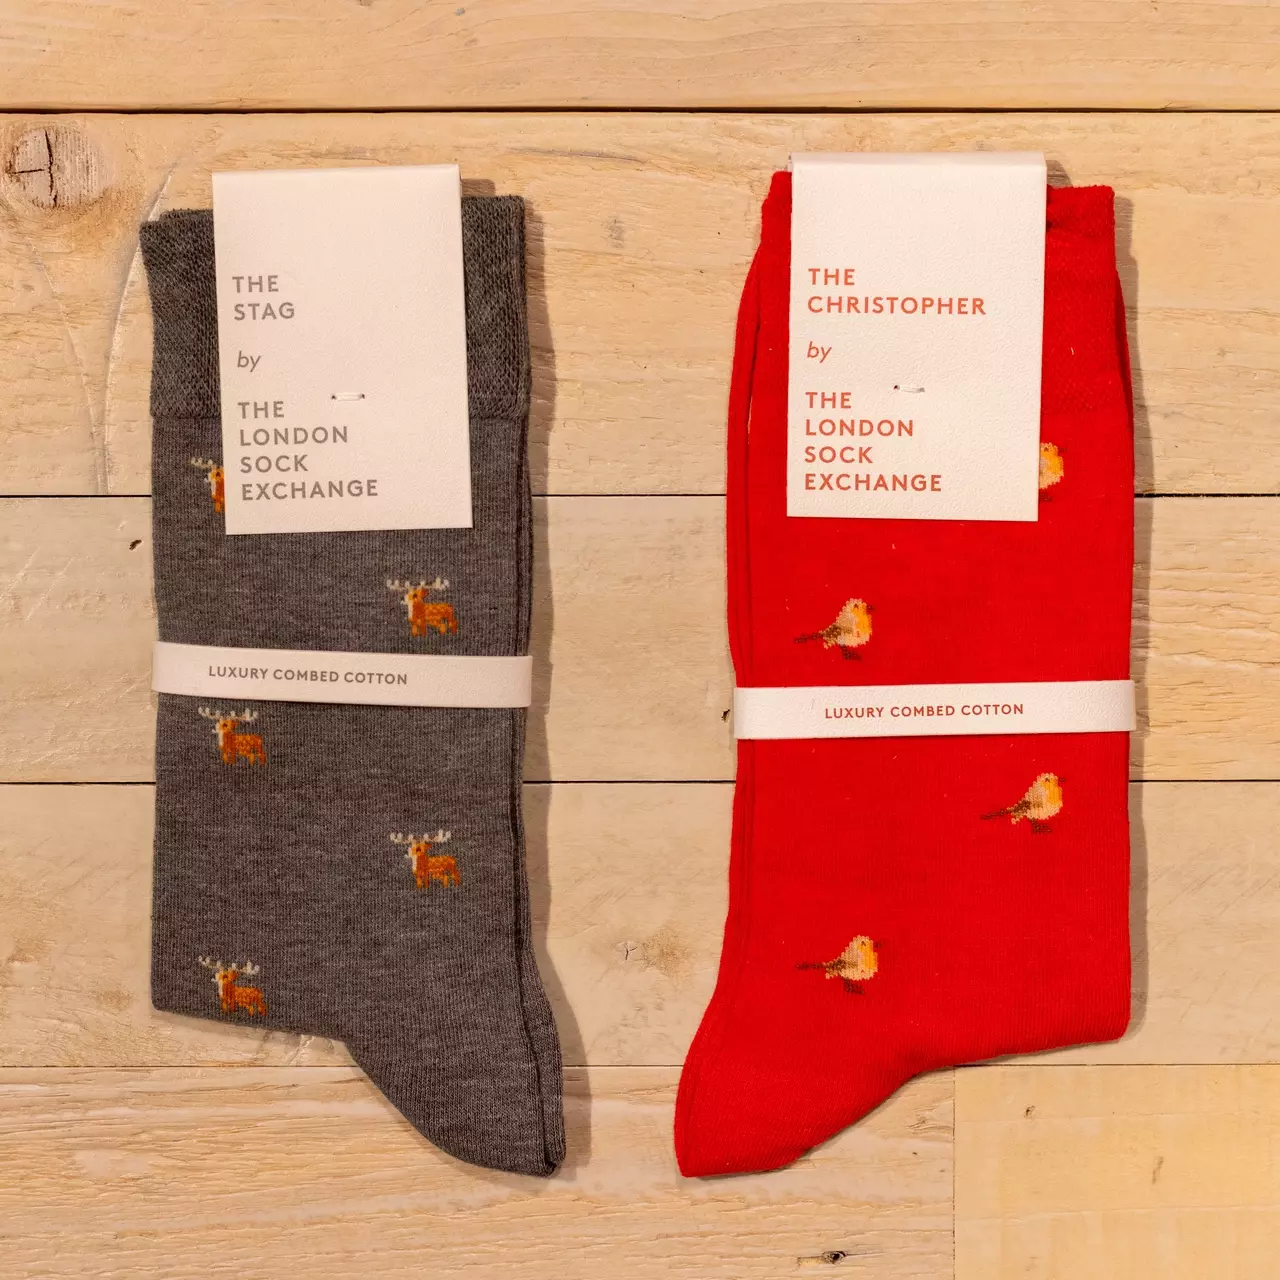 A pair of red socks with robins on and grey socks with stags on from the London Sock Exchange